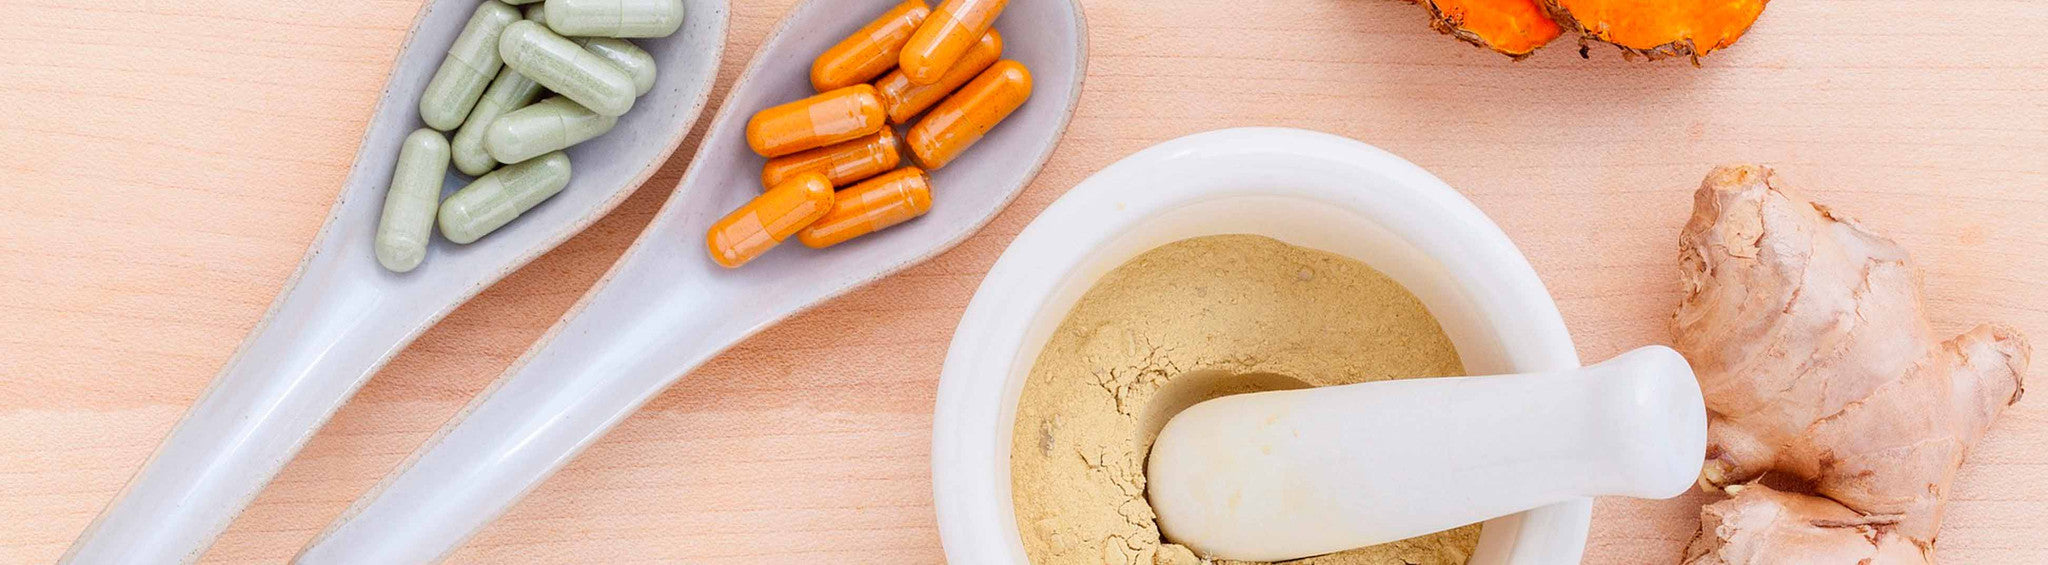 DO PEOPLE REALLY NEED NUTRITIONAL SUPPLEMENTS?